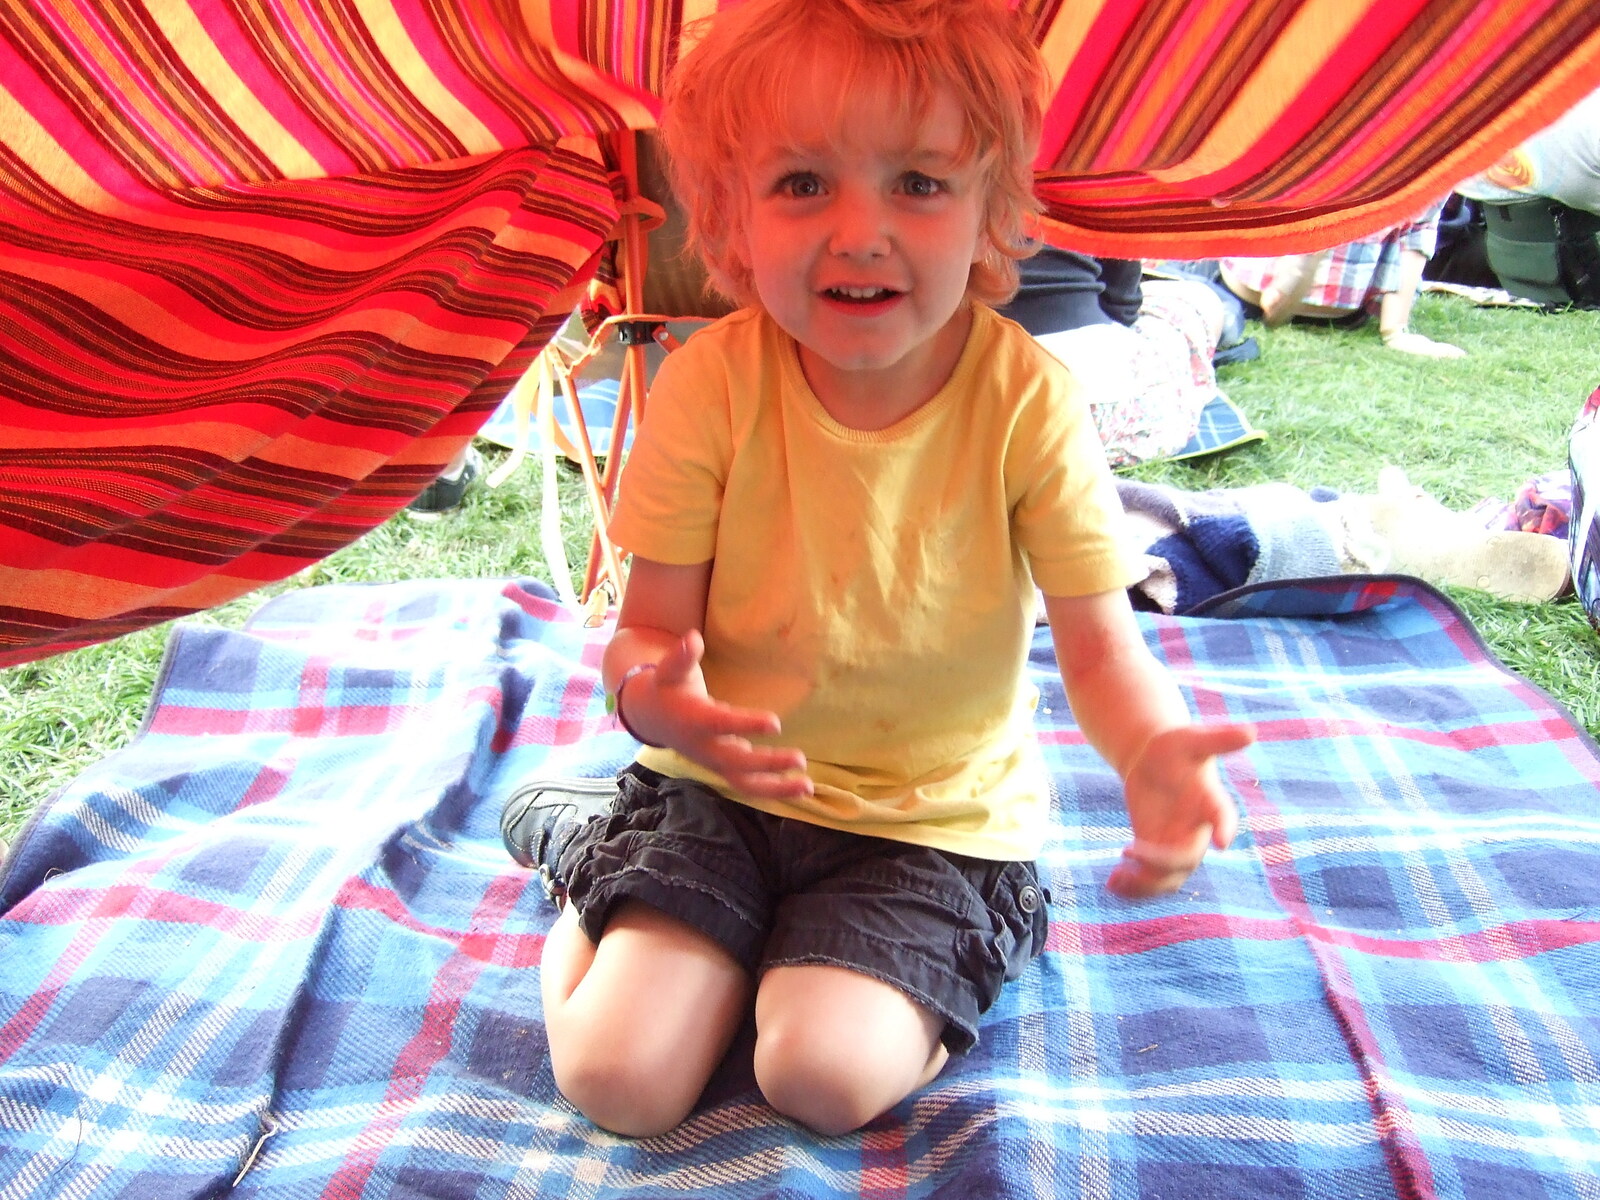 Fred under a blanket tent from The Cambridge Folk Festival, Cherry Hinton, Cambridge - 28th July 2012